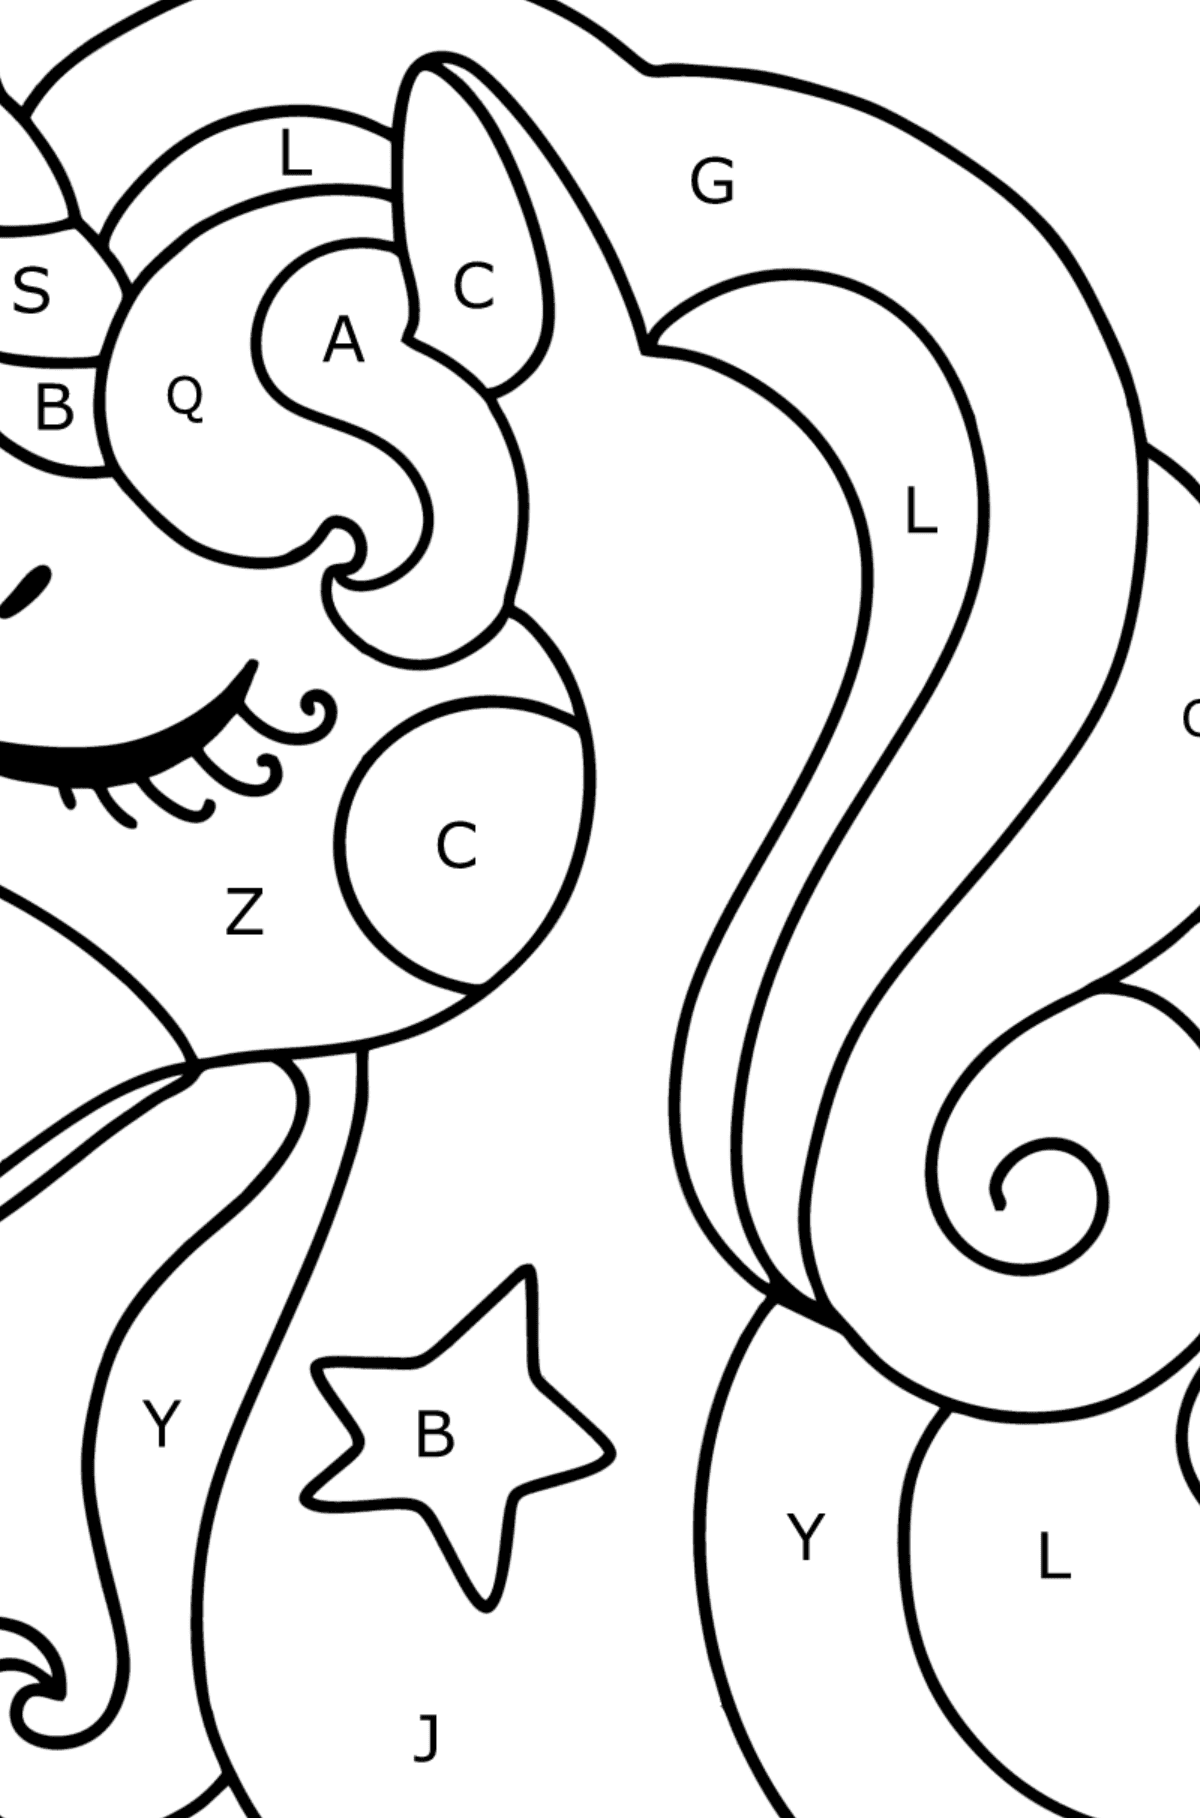 Unicorn head coloring page - Coloring by Letters for Kids